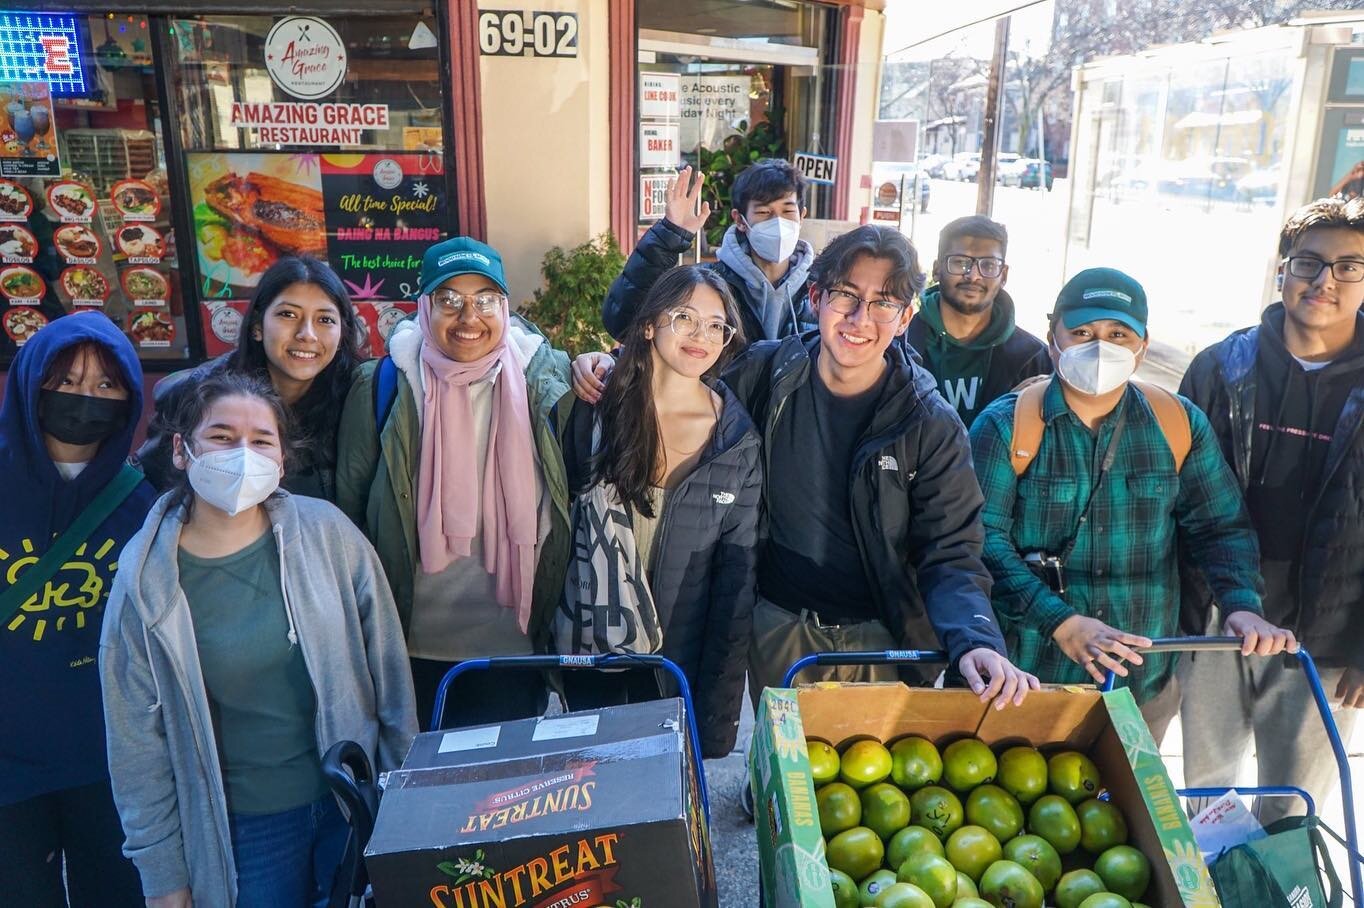 Kicking off 2023 with a great start! 🛒 

More highlights from yesterday's distribution in #Woodside and #JacksonHeights!

Photos taken by 📸 @jonathanislarampagoa!

#newyear #2023 #woodside #jacksonheights #queensny #nyc #nycyouth #youth